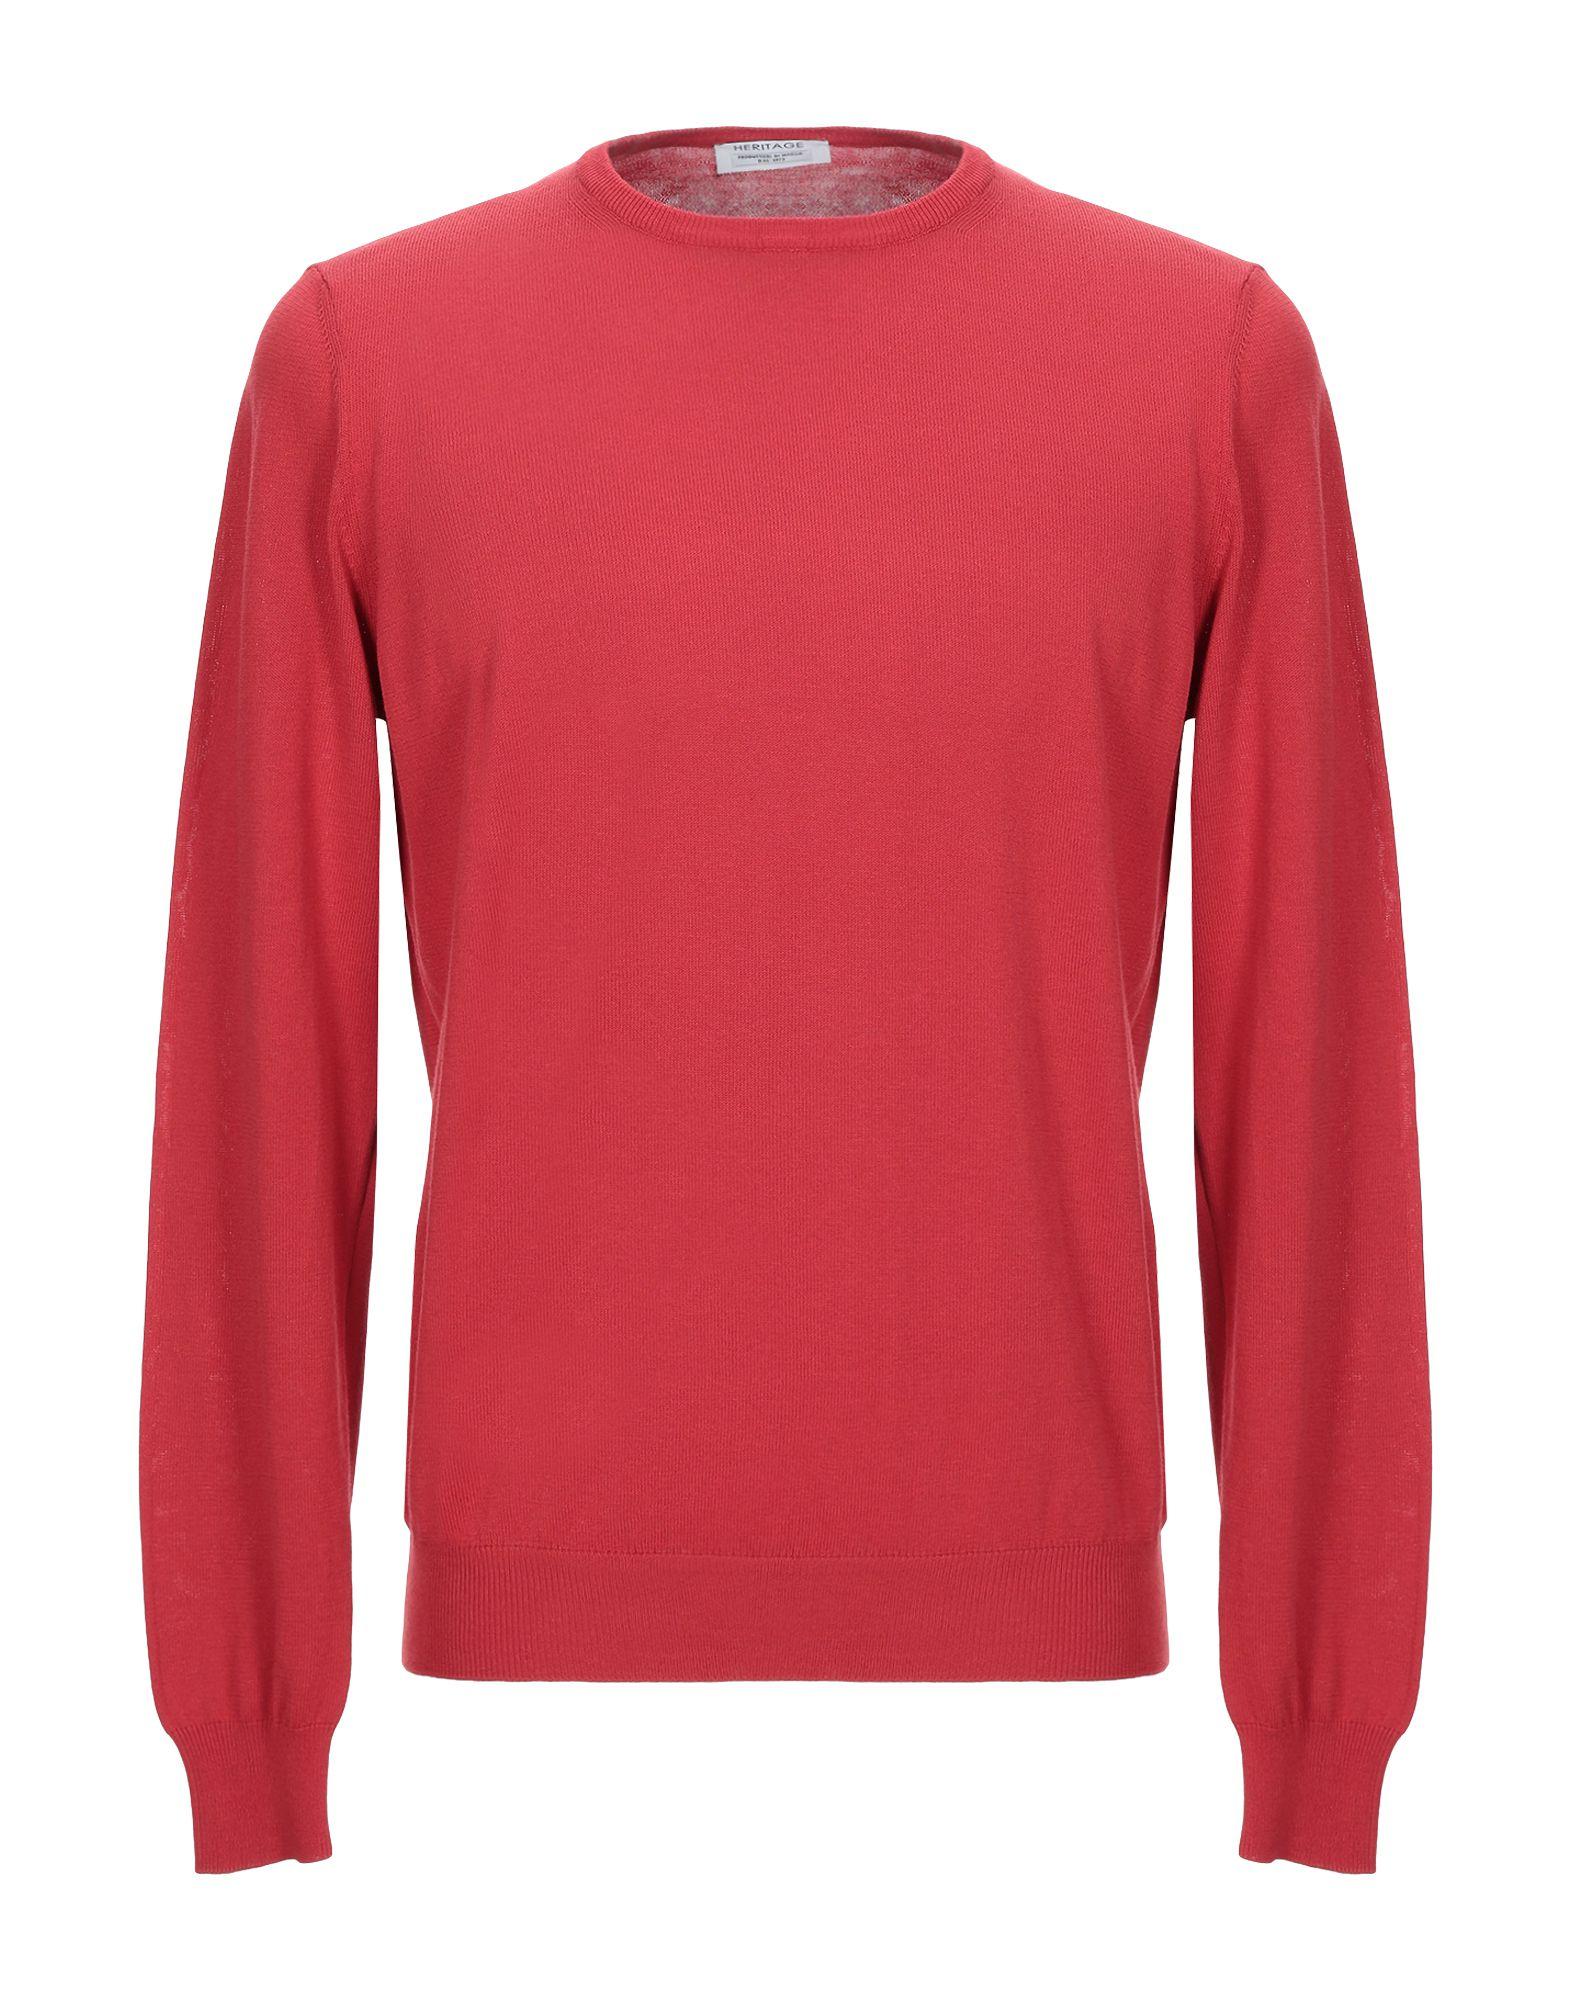 Heritage Cotton Jumper in Red for Men - Lyst